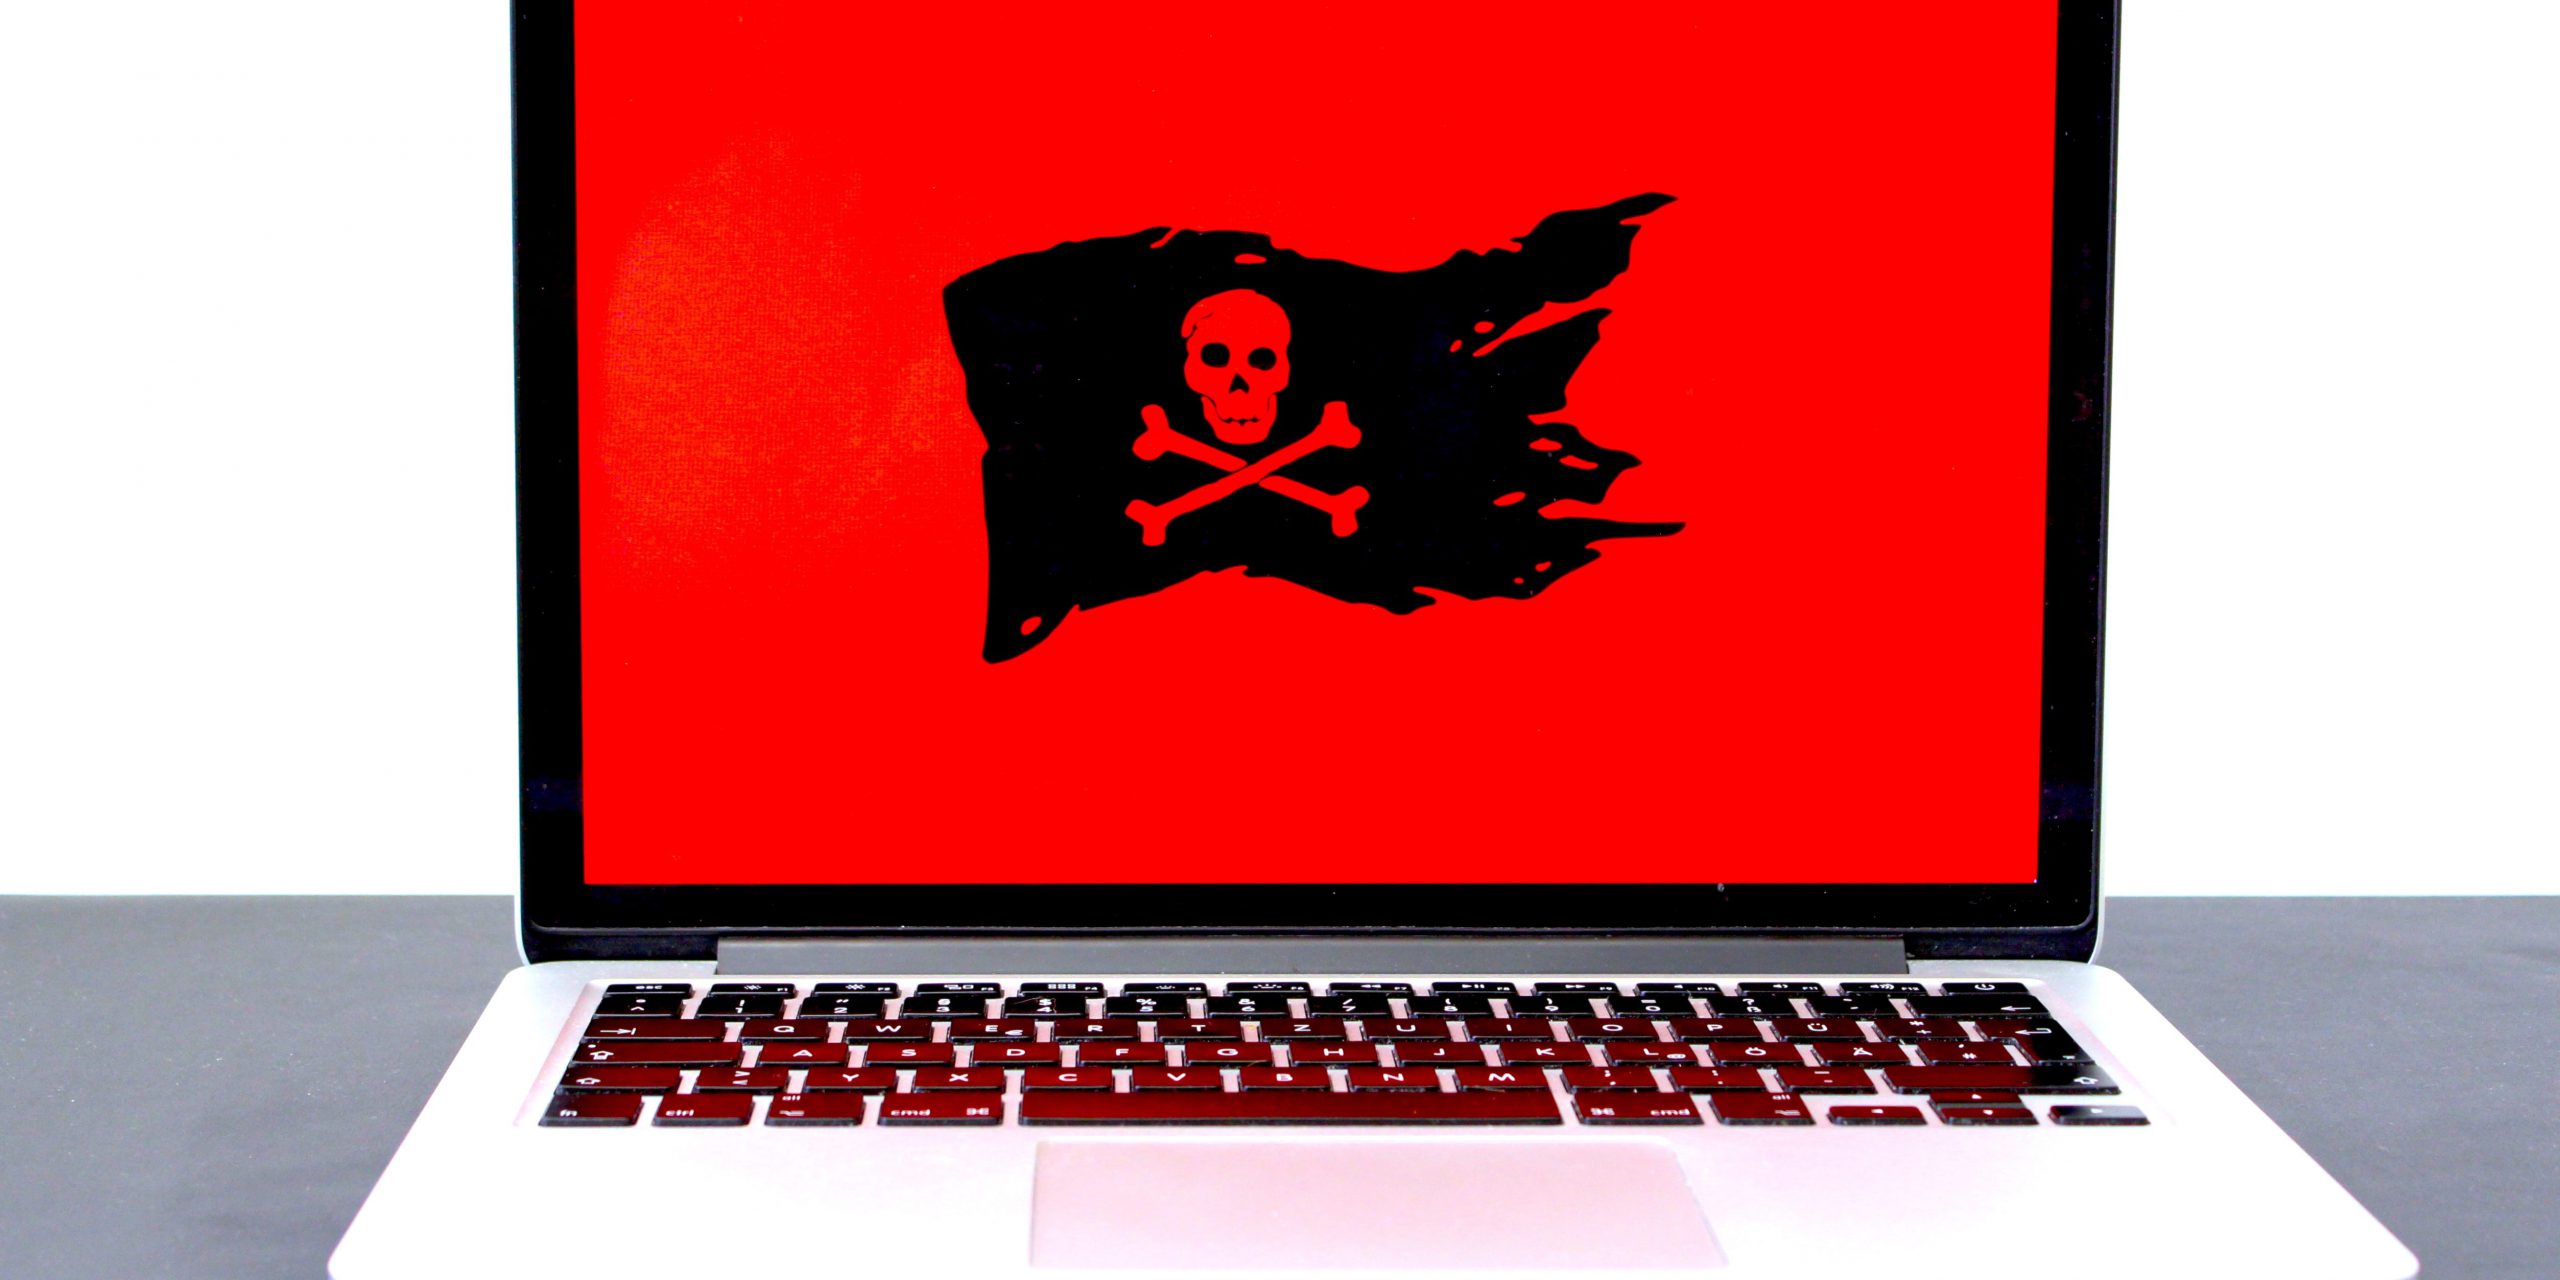 Your Company Has Been Infected with Ransomware